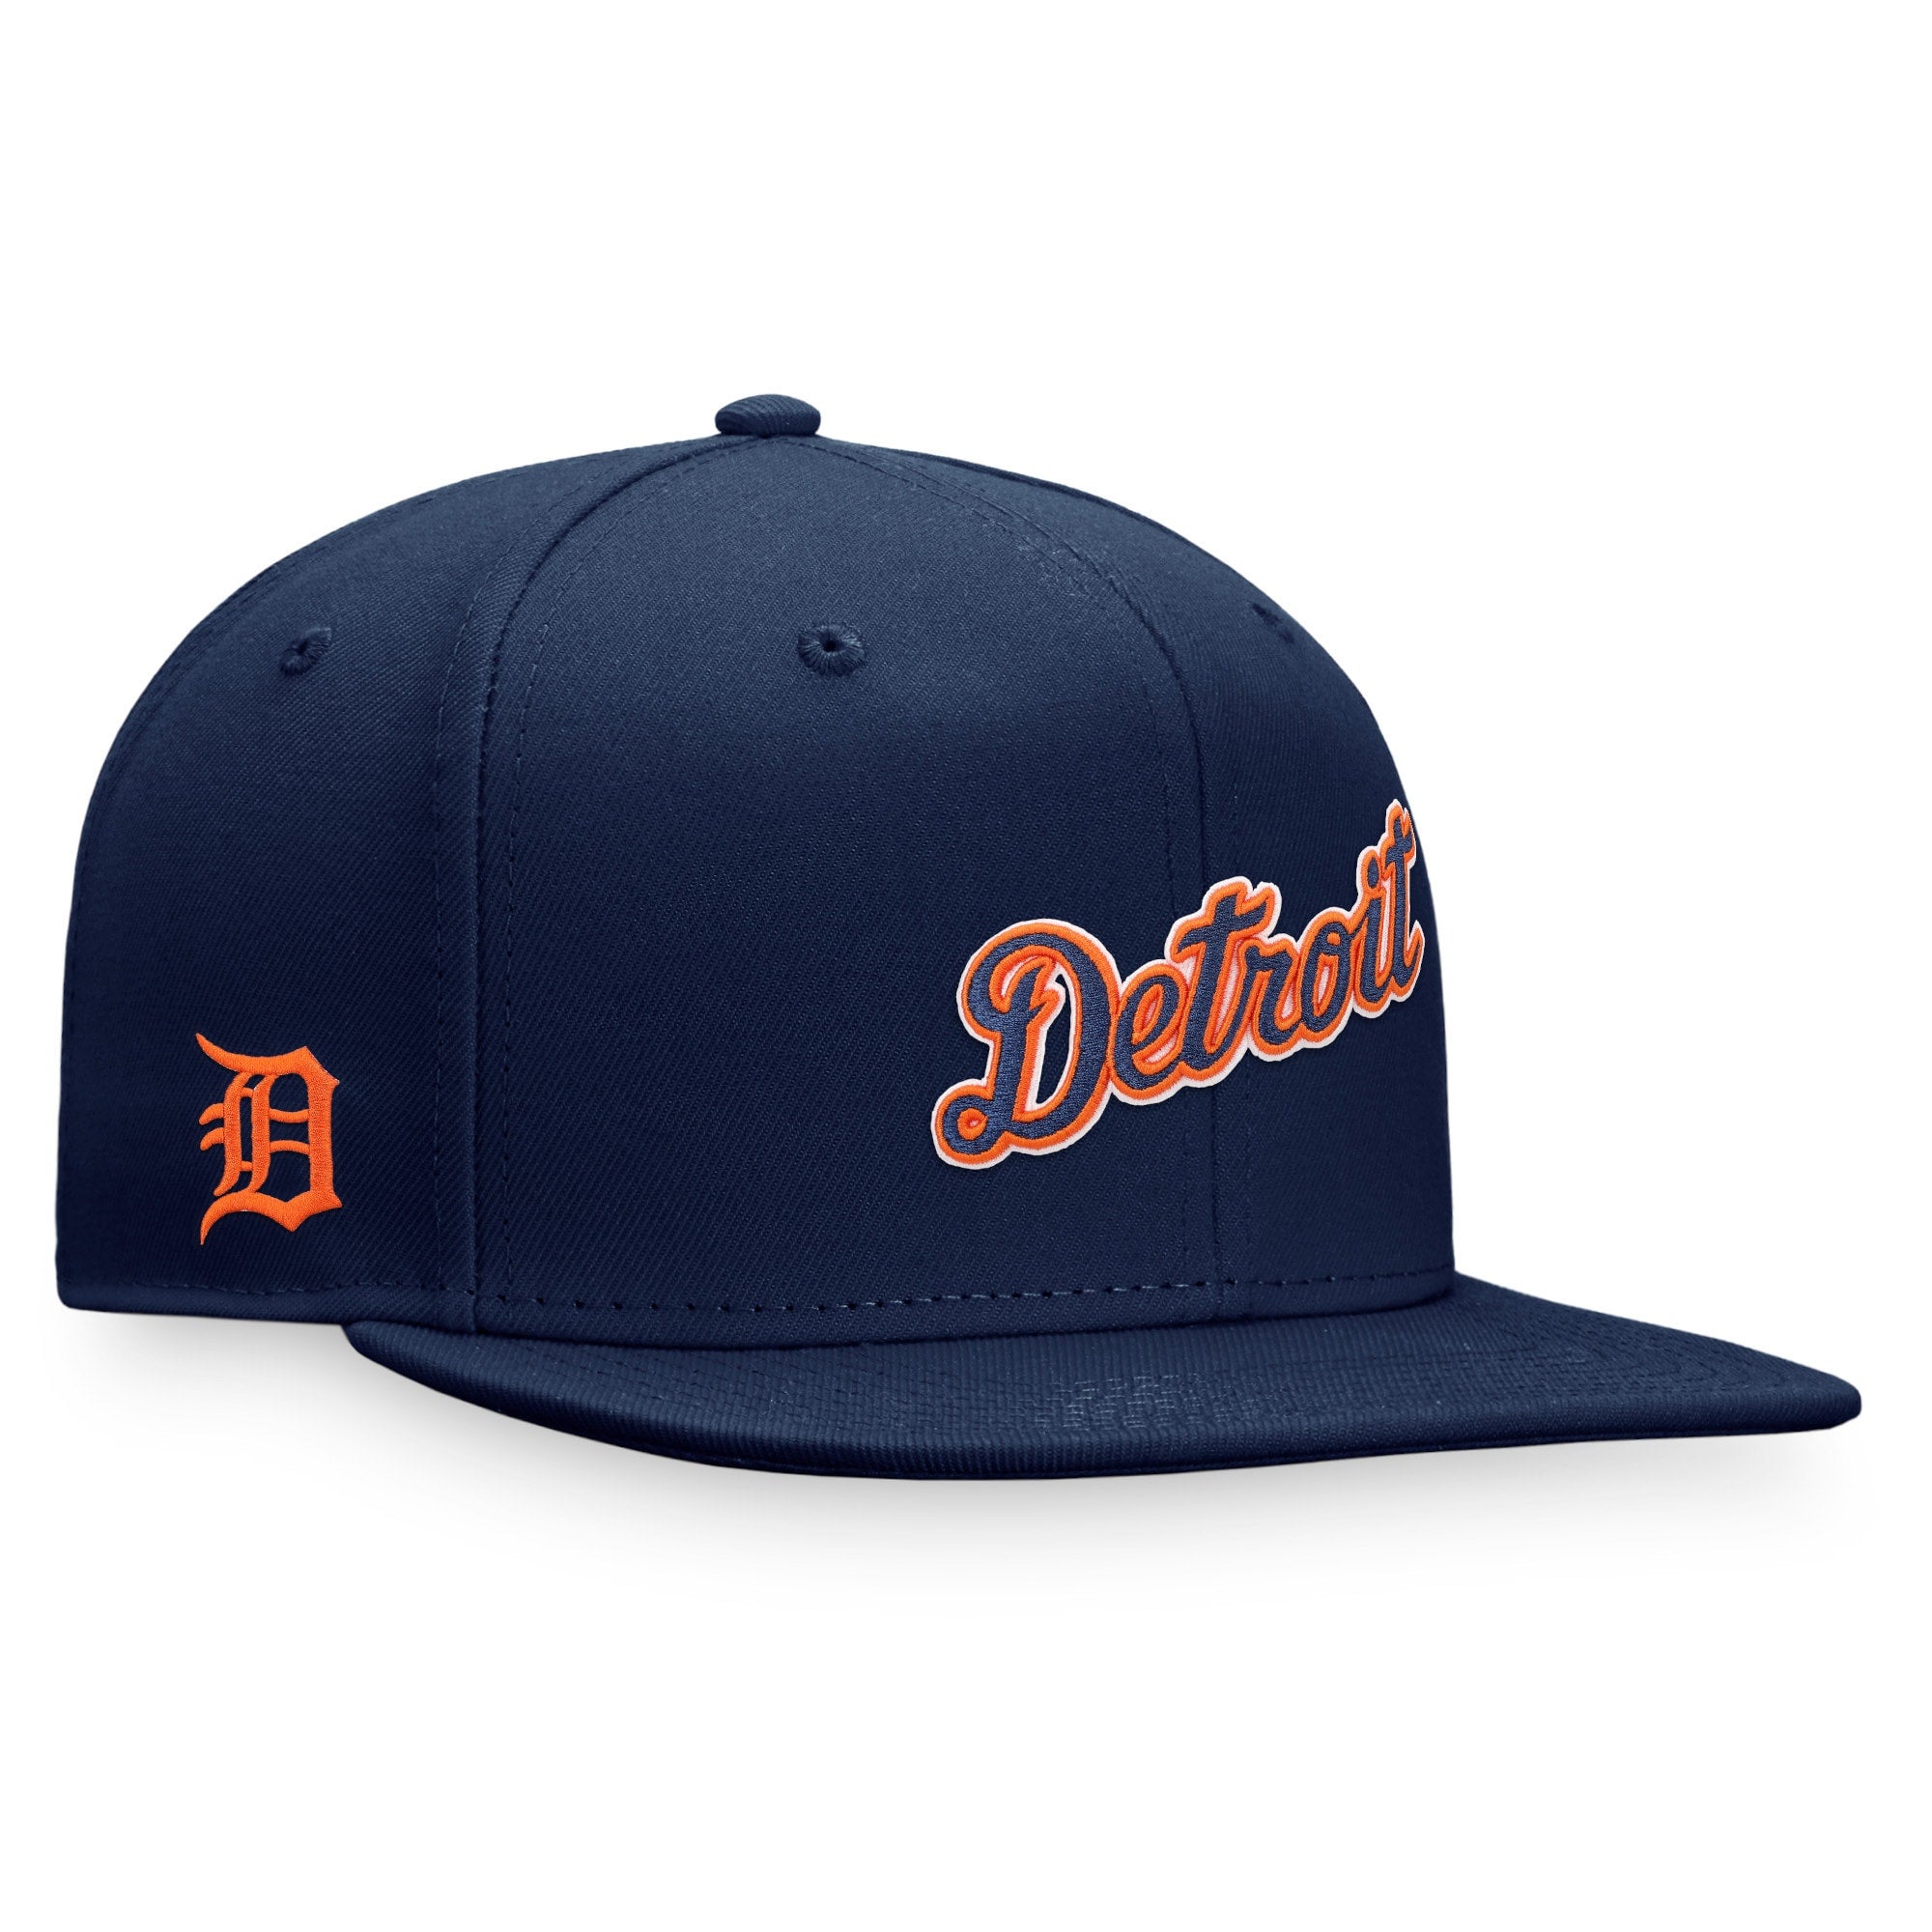 Fanatics Tigers Iconic Team Patch Fitted Hat - Men's